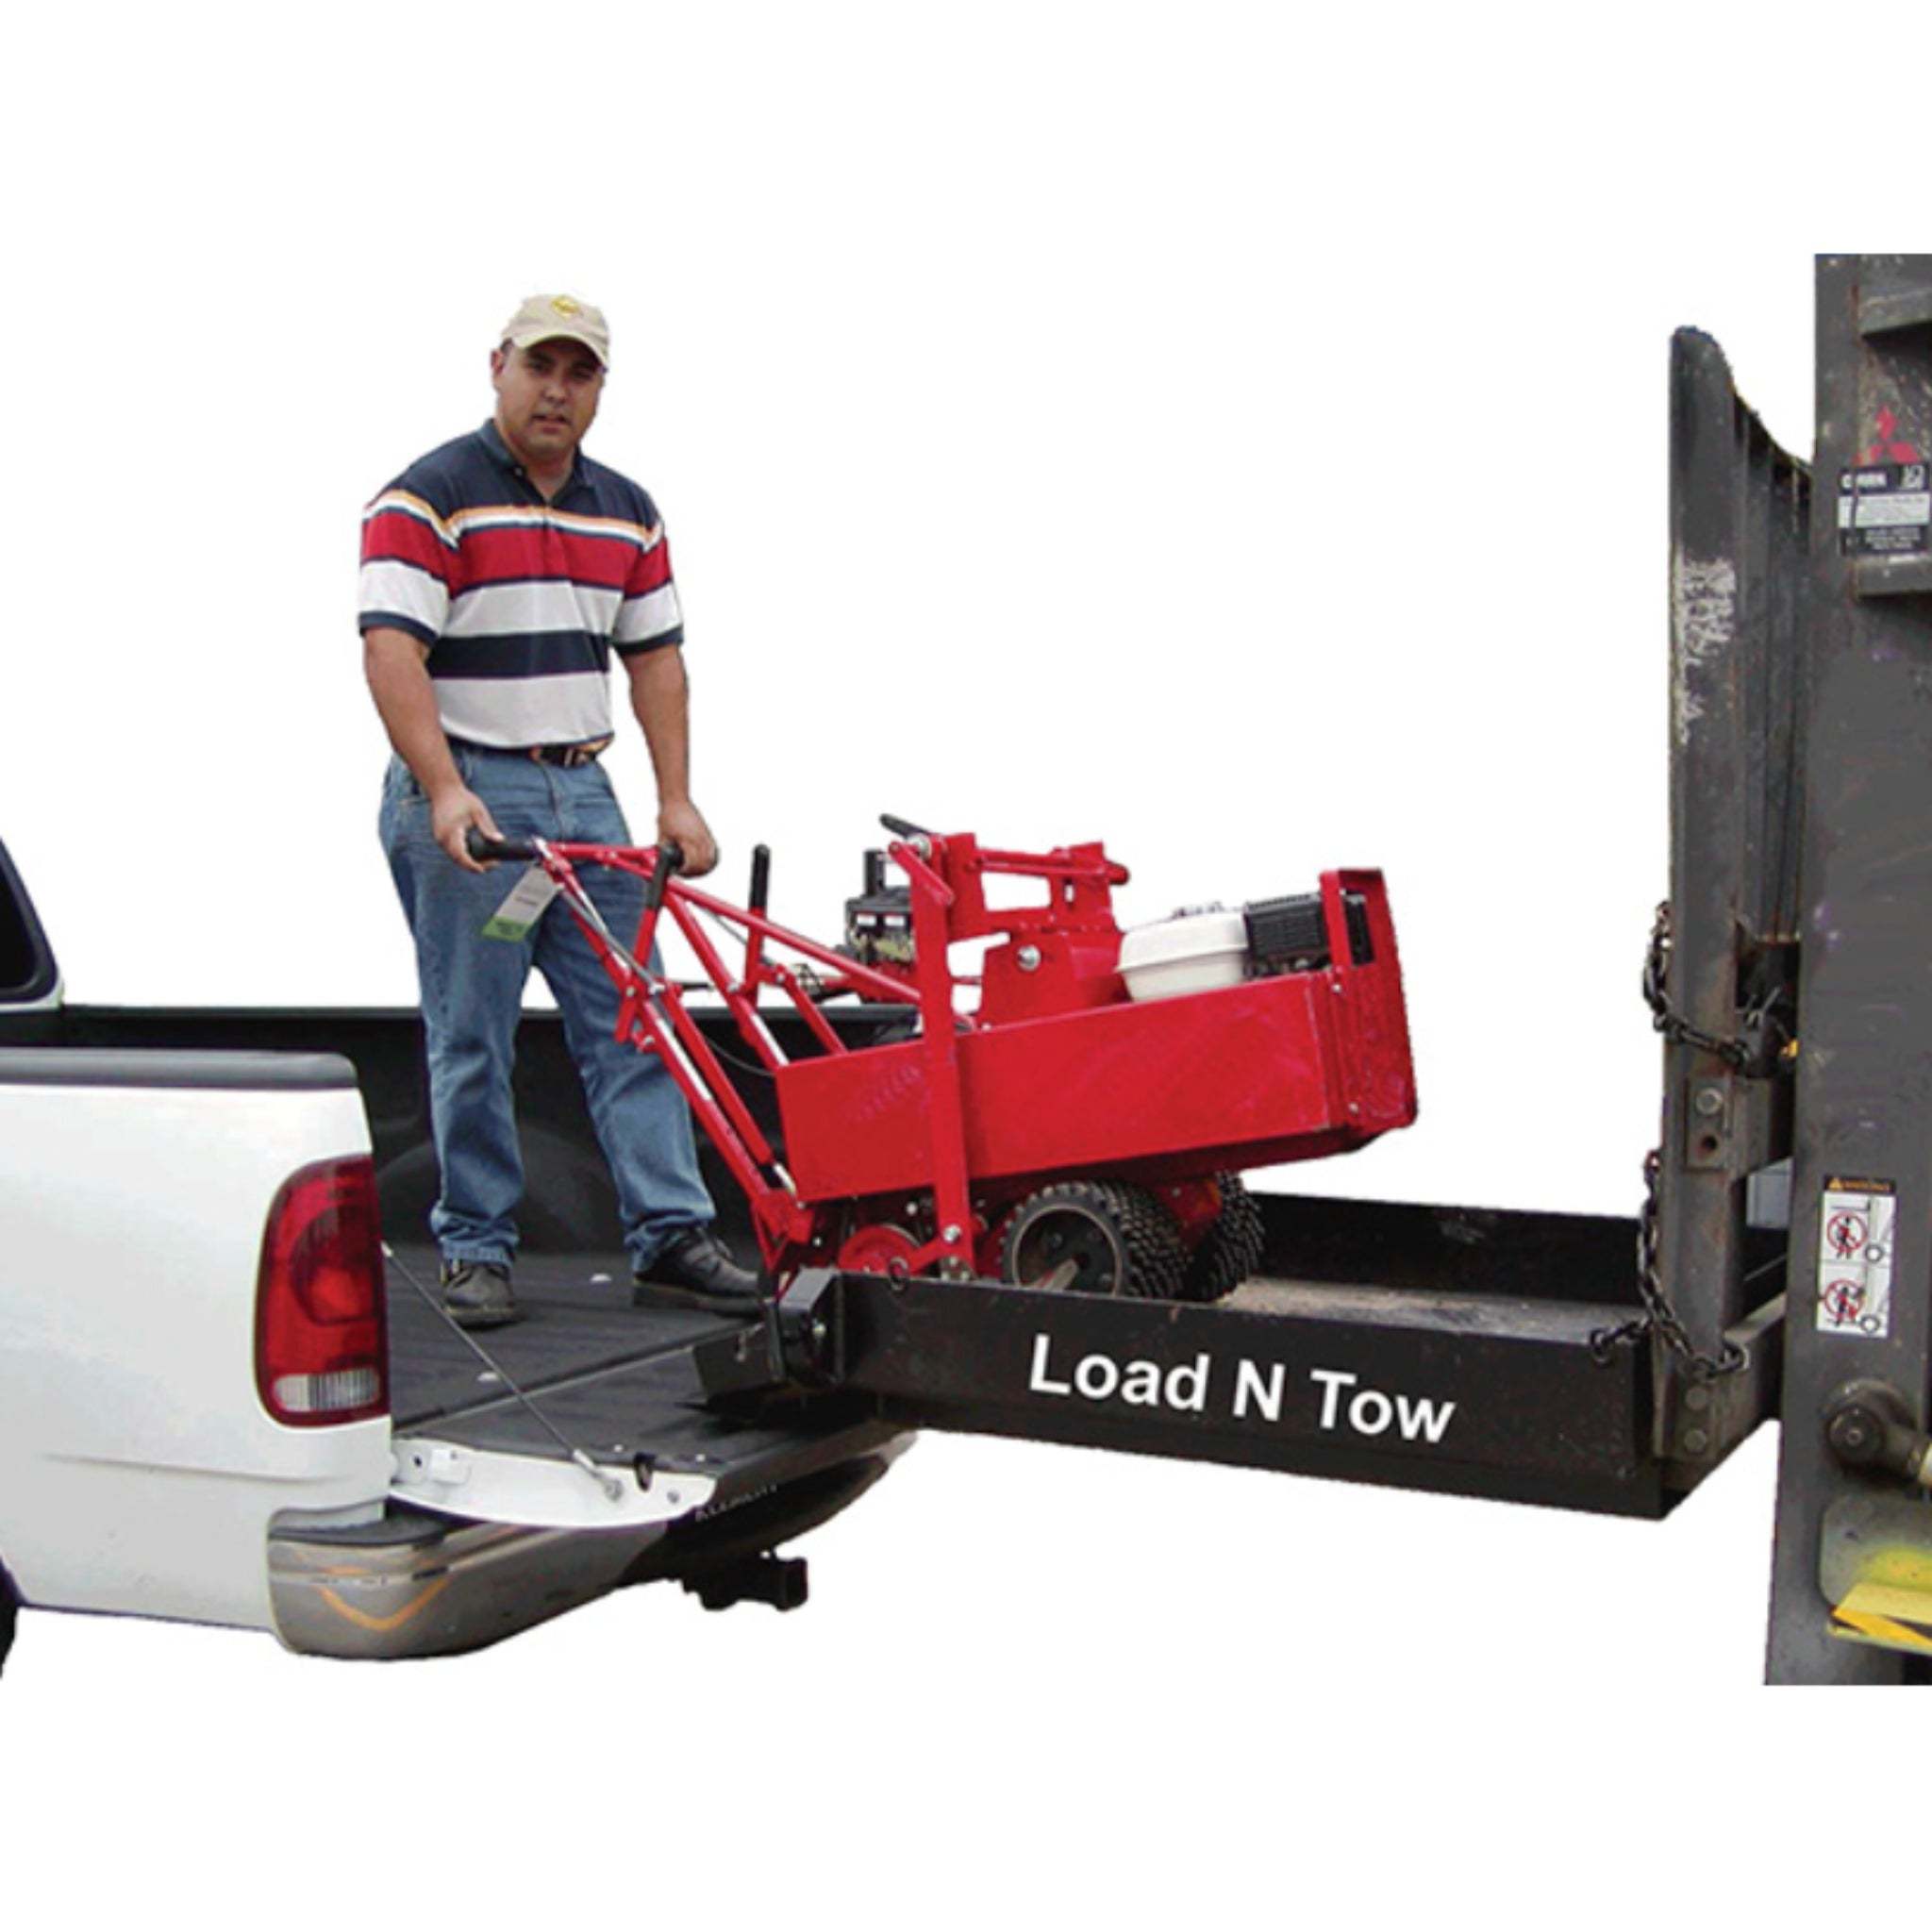 Star Industries Load-N-Tow Forklift Loading Platform and Towing Attachment